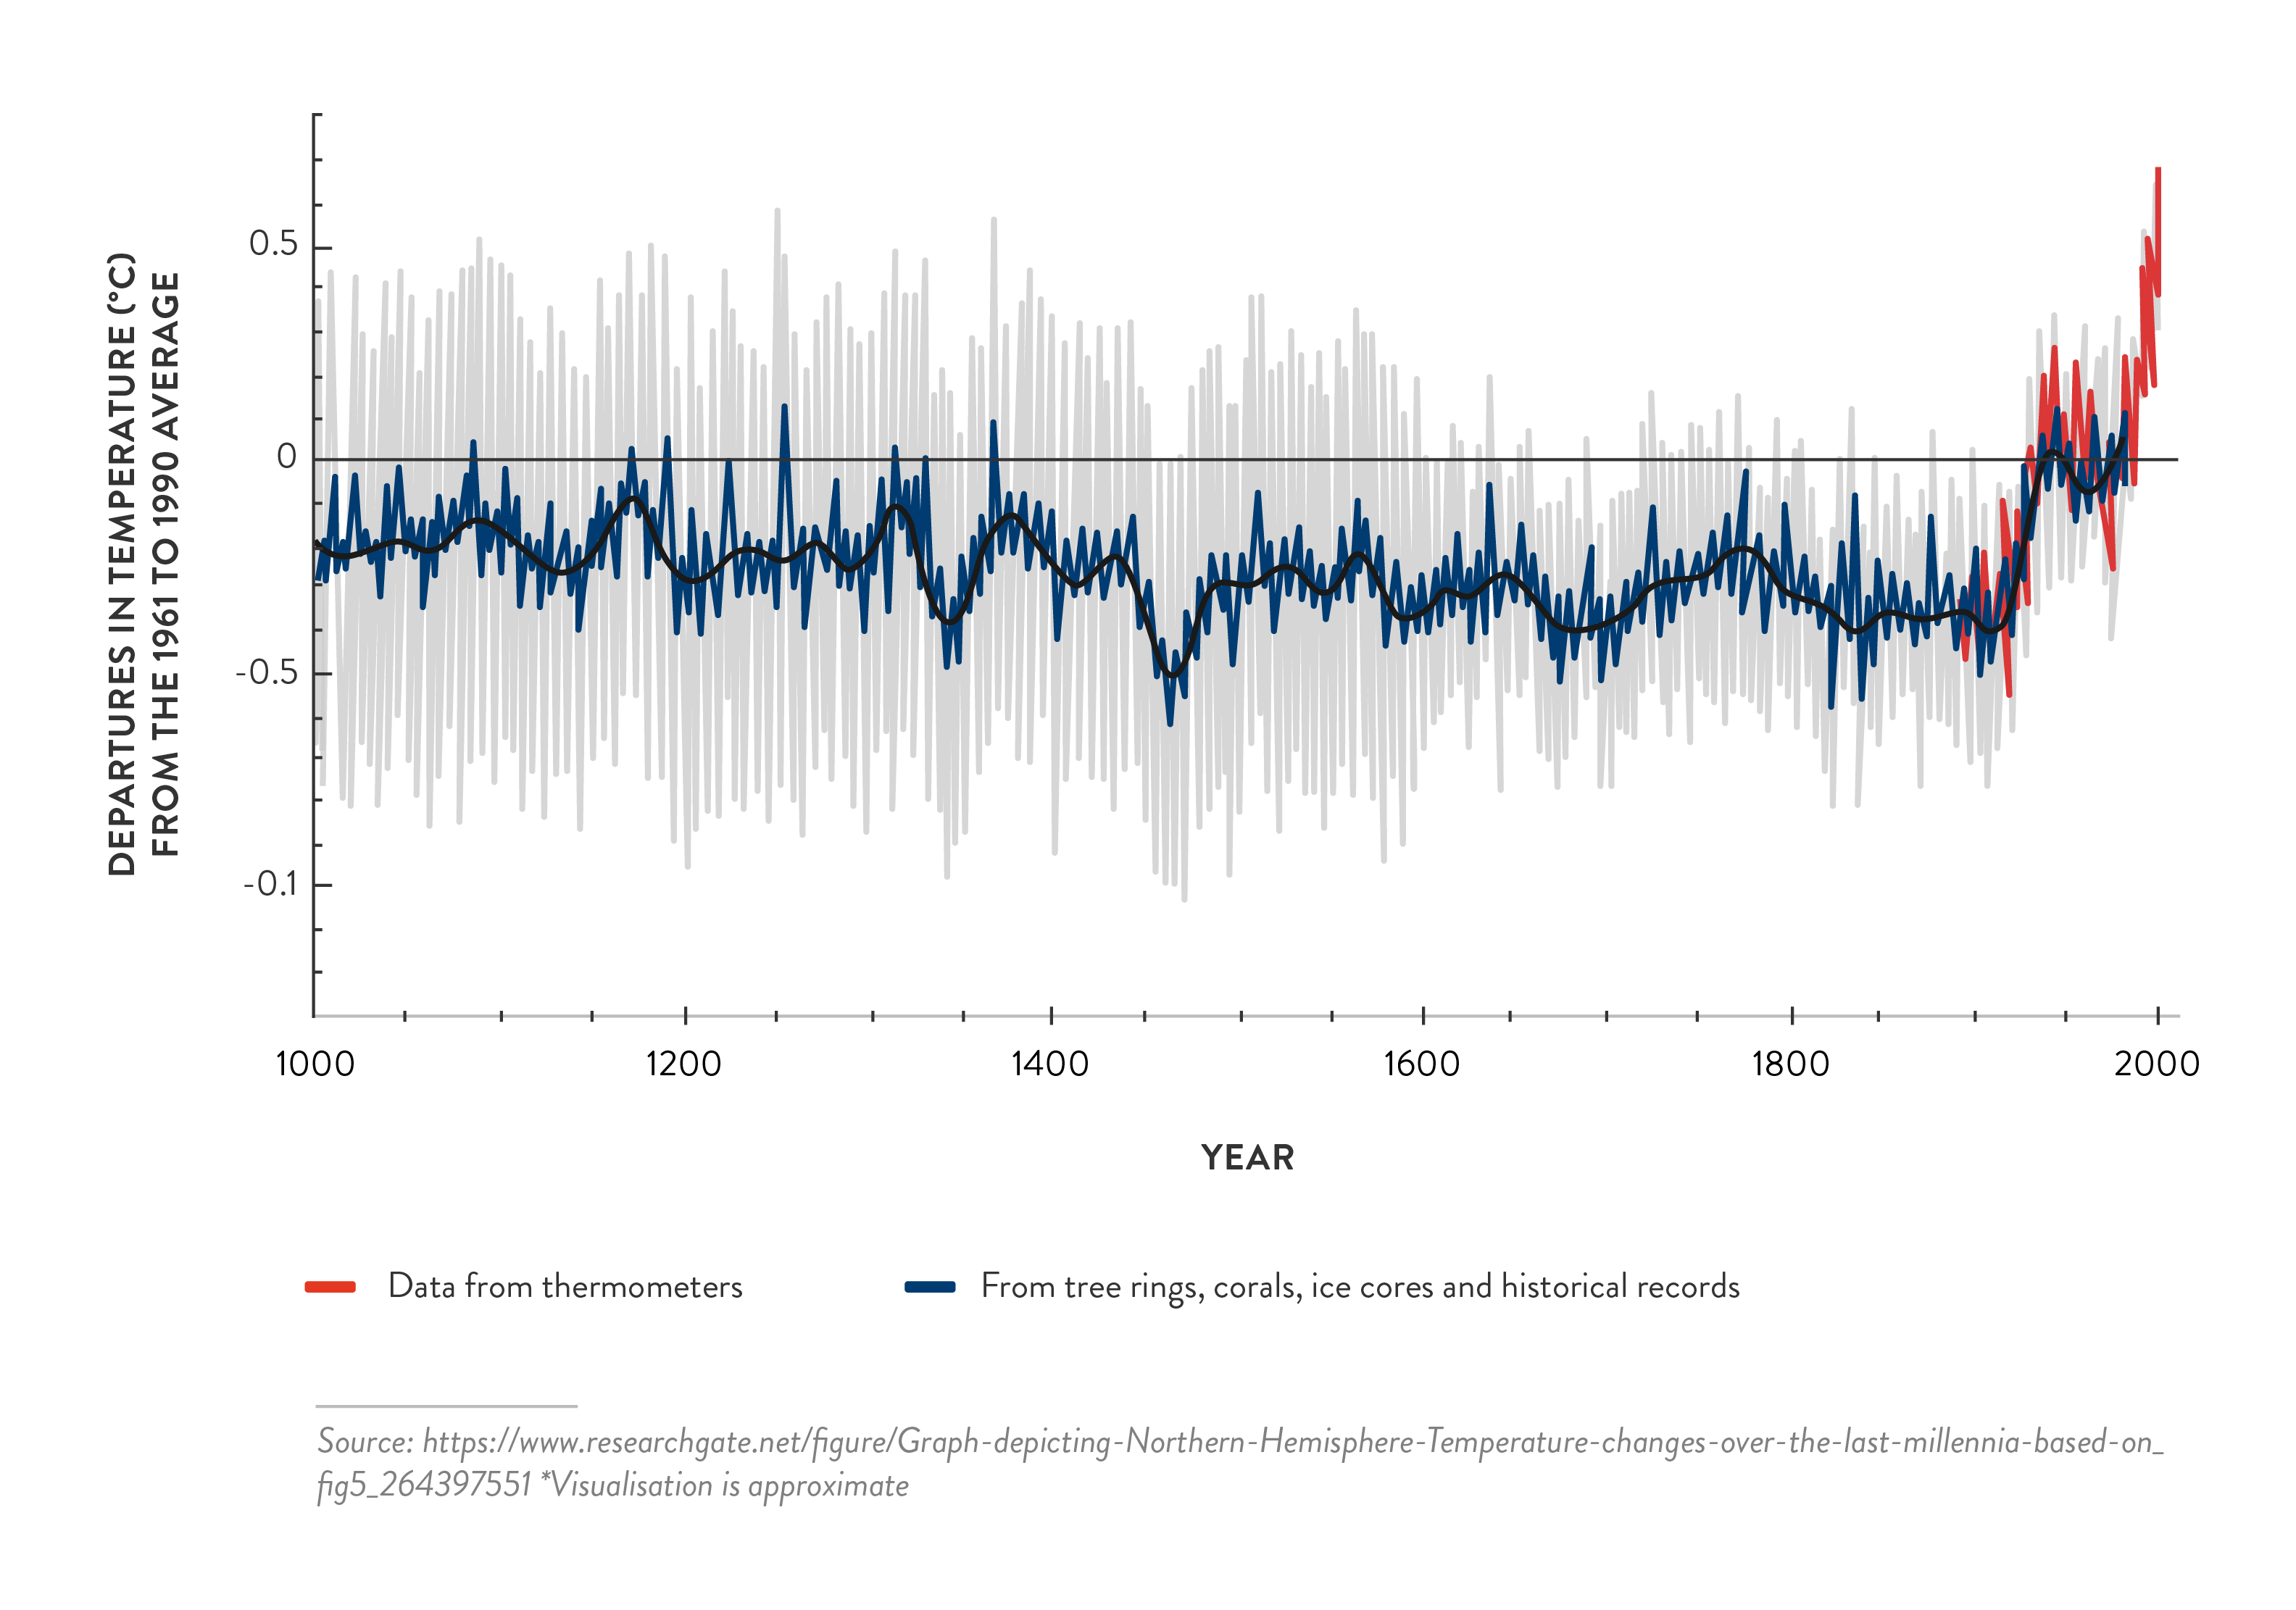 covid-19-and-climate-change-how-apply-lessons-pandemic-climate-emergency - Figure 1b – Temperature changes in the northern hemisphere over the past 1,000 years